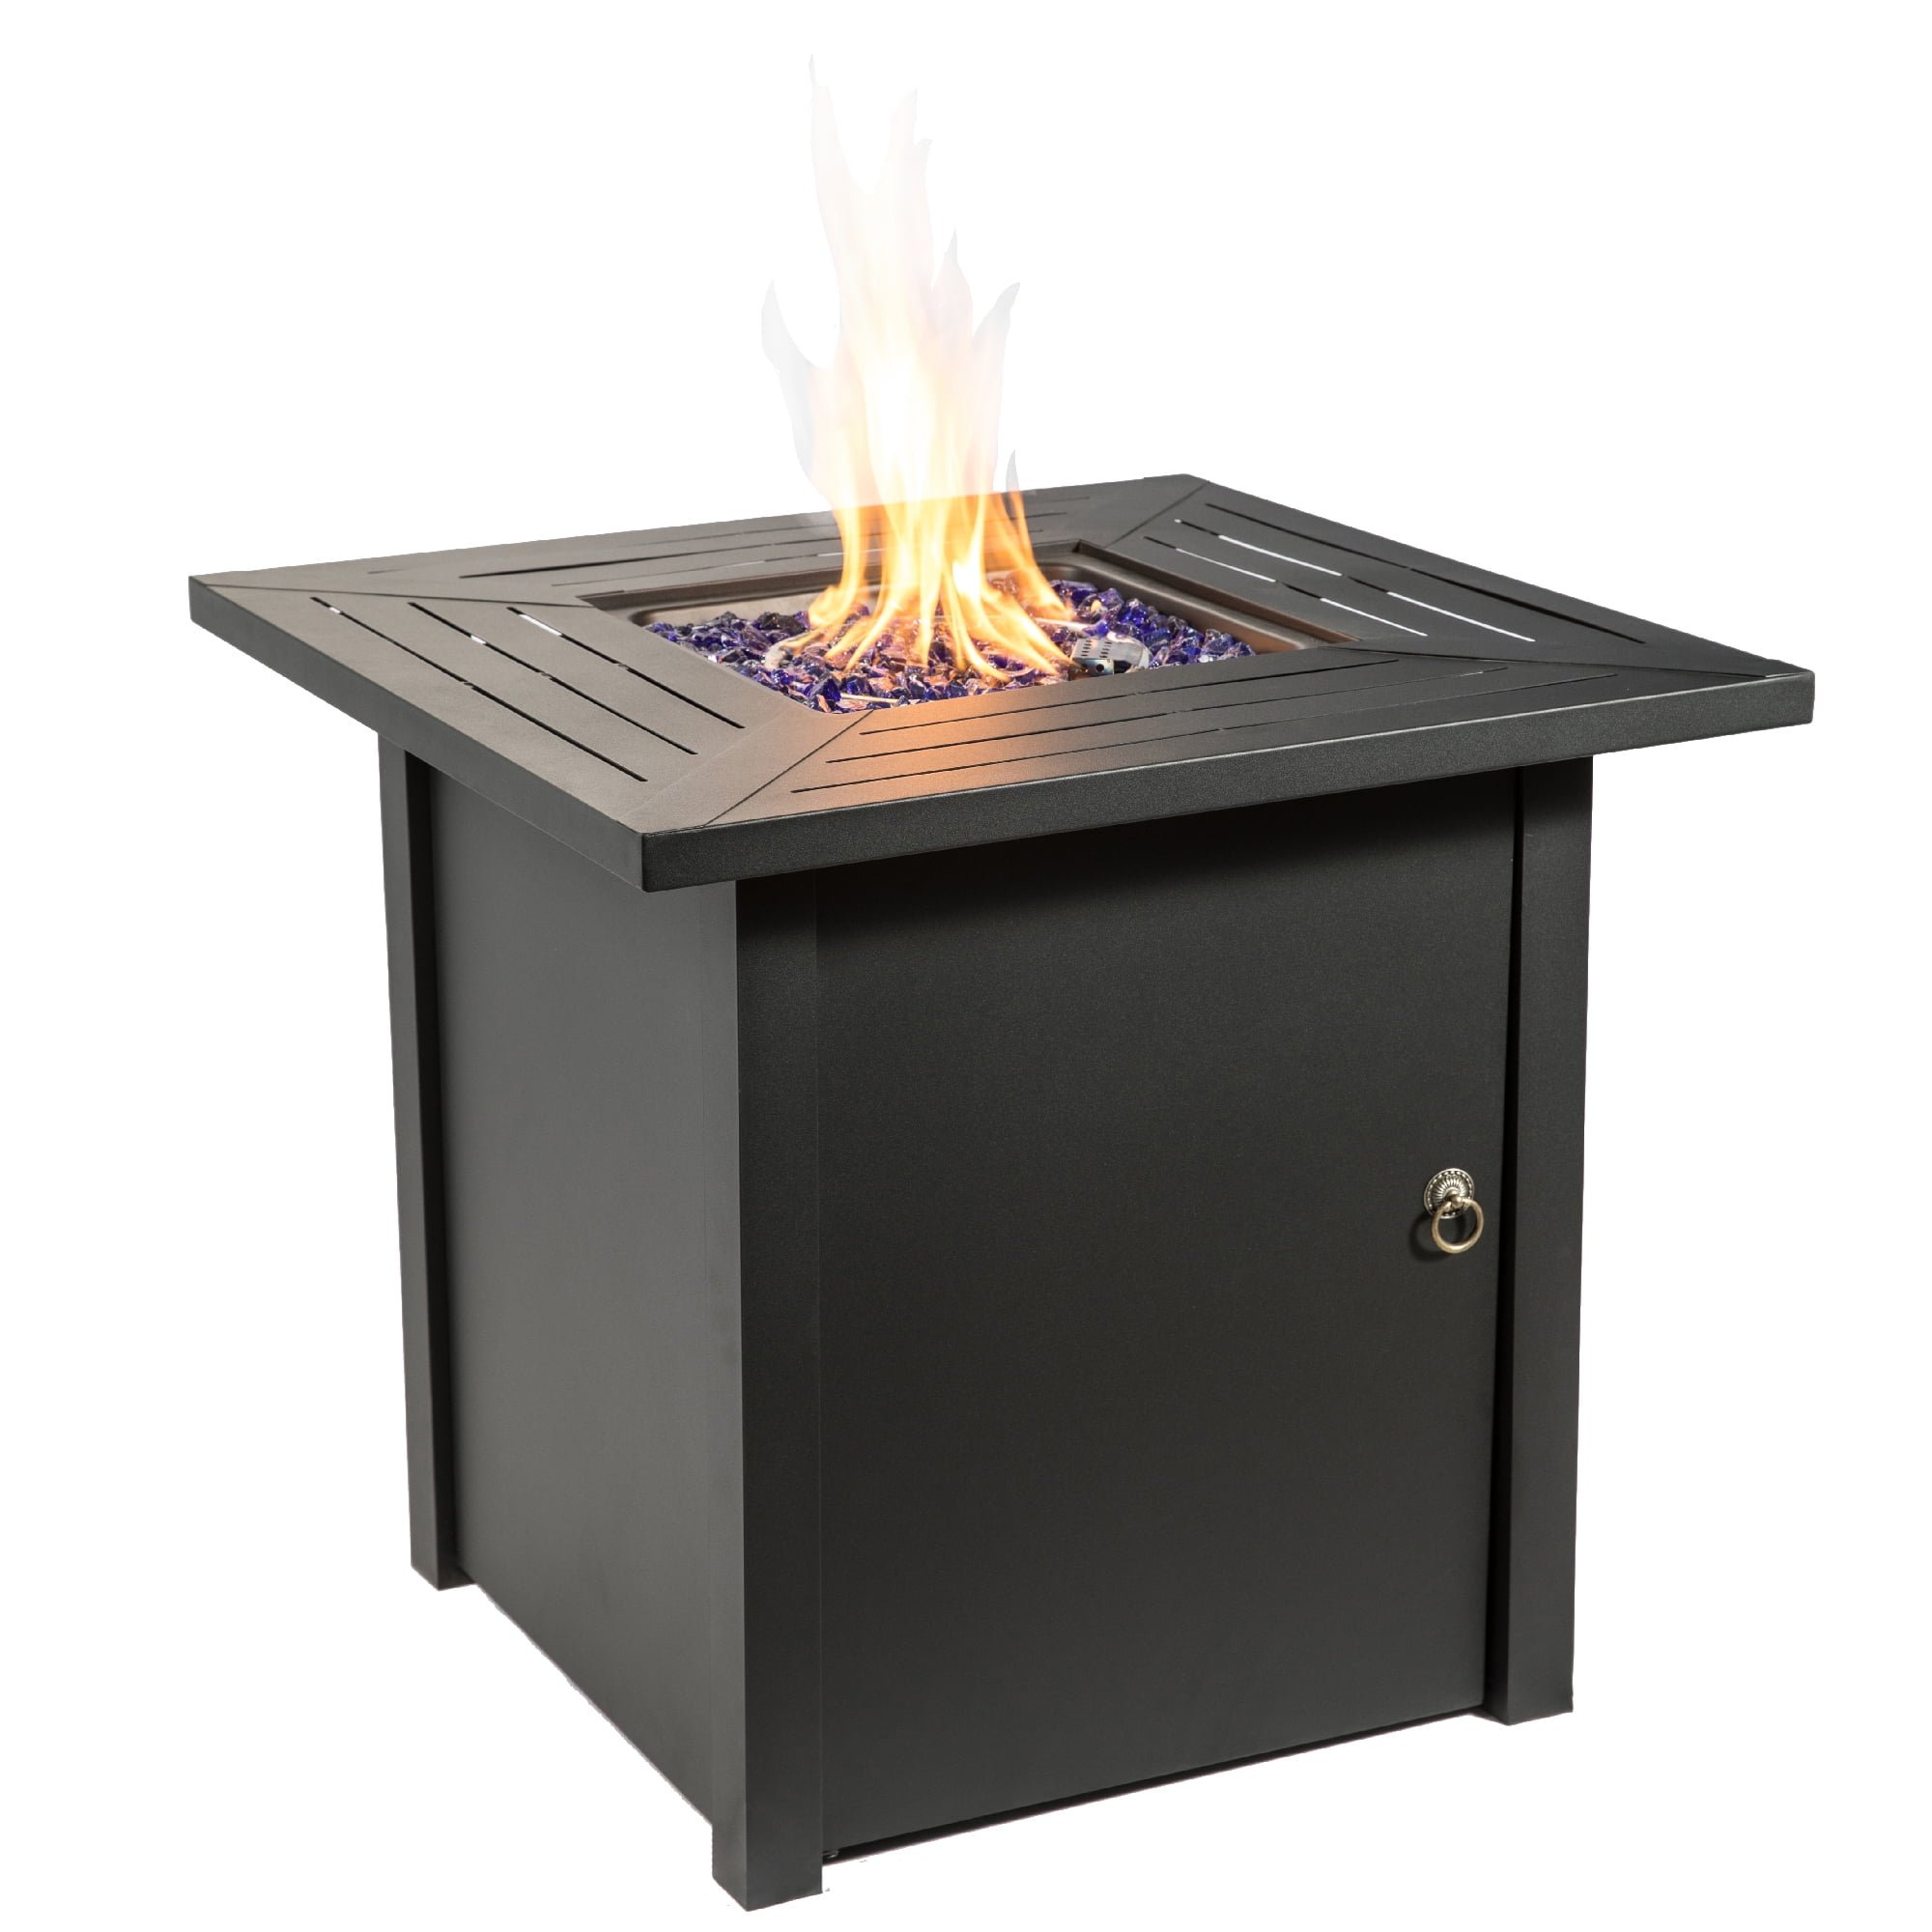 Peaktop Outdoor Square 30 Gas Fire Pit, Small Glass Fire Pit